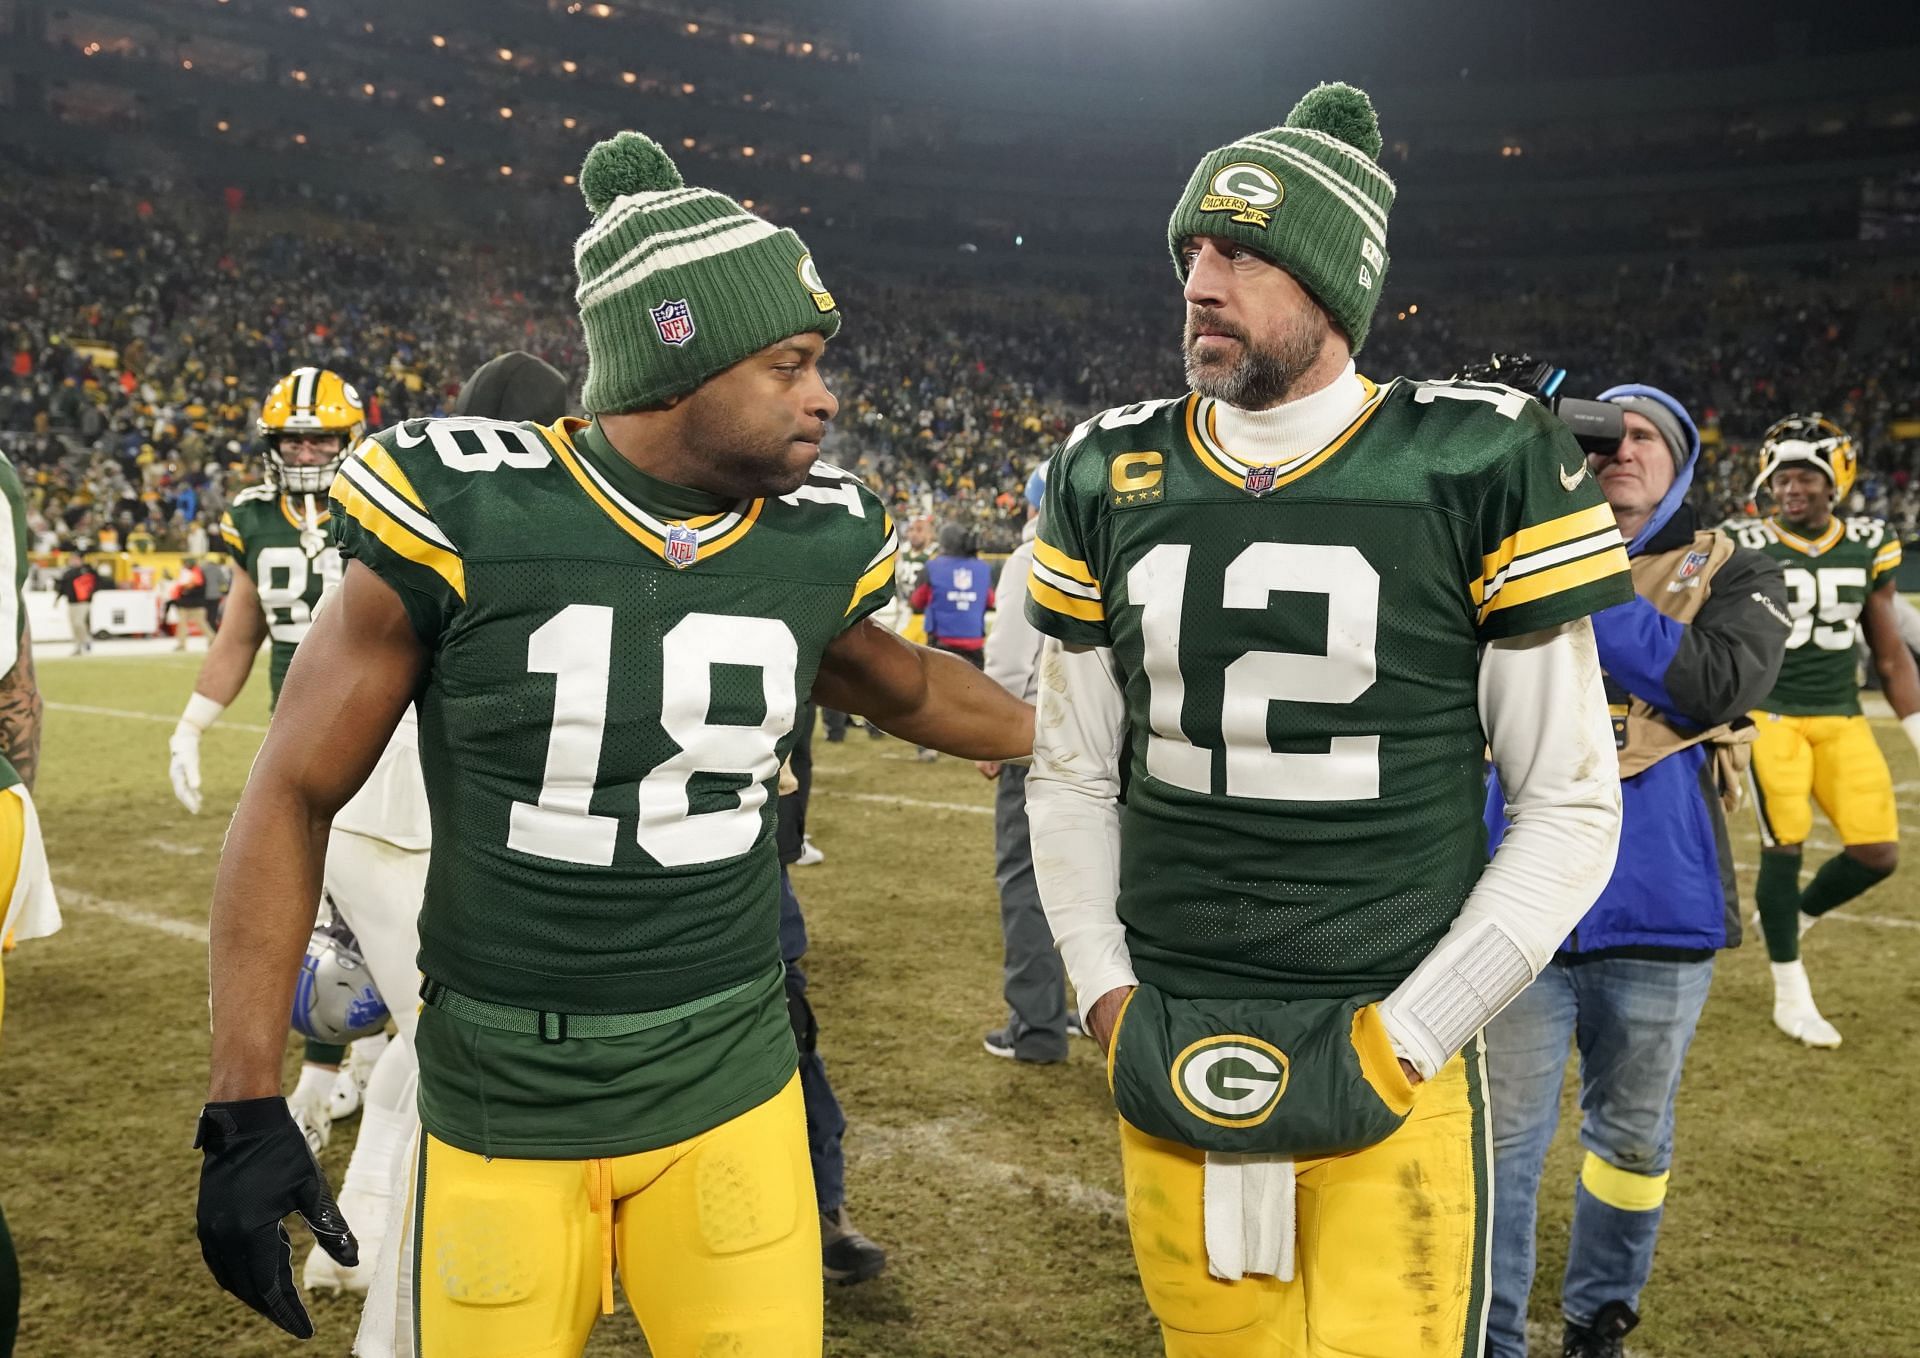 Aaron Rodgers and Randall Cobb at Detroit Lions v Green Bay Packers